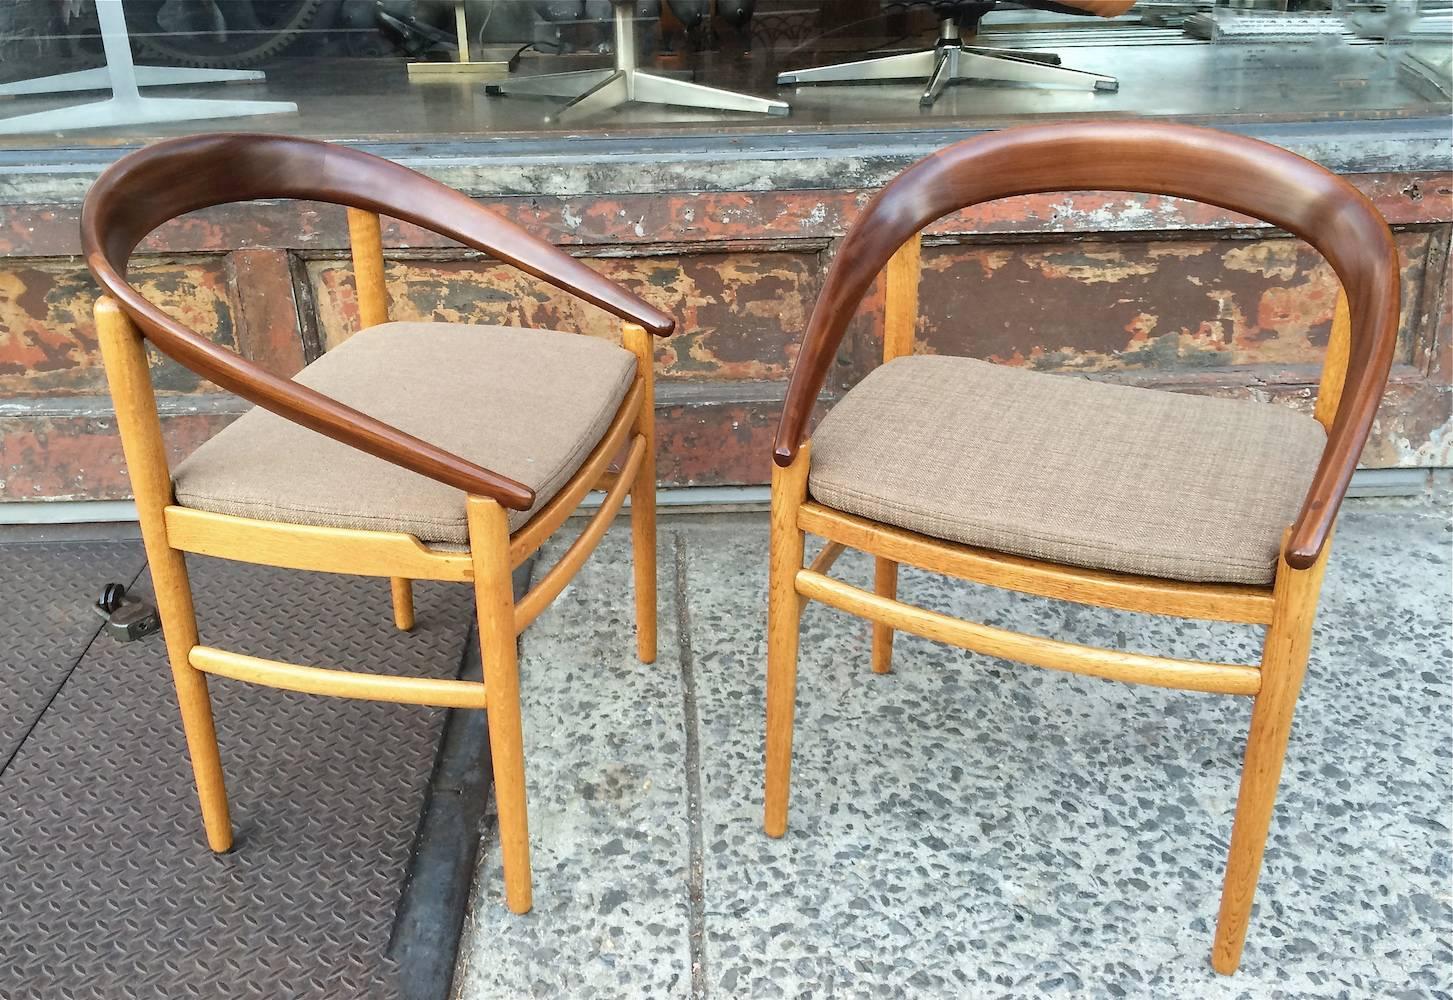 Mid-20th Century Danish Modern Barrel Back Chairs by Brockmann Petersen for Poul Jeppesen